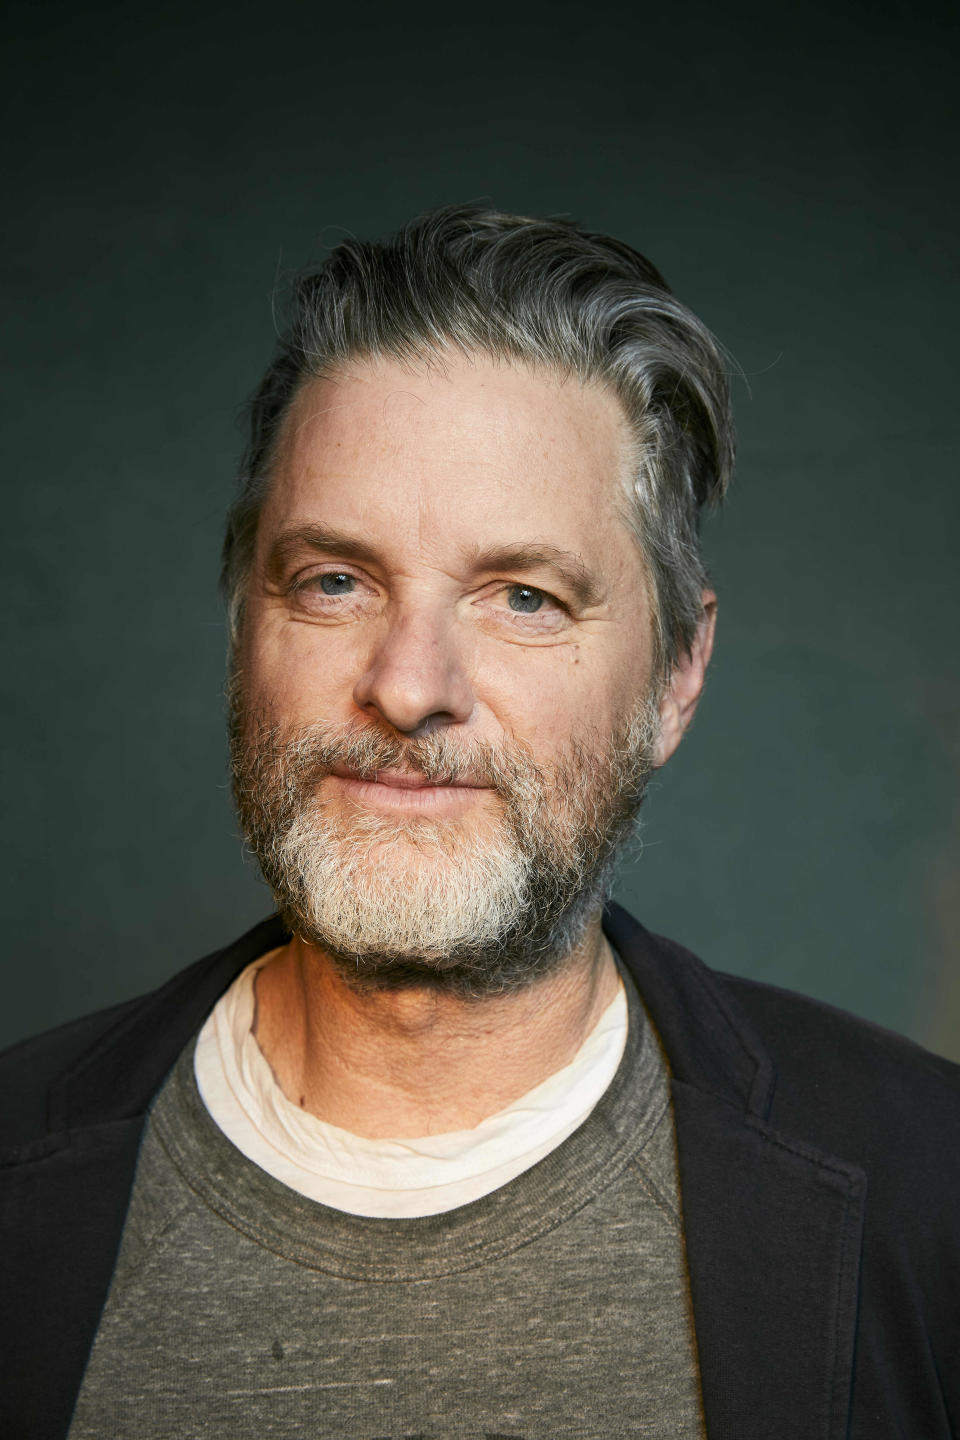 Shea Whigham poses for a portrait to promote the film "Eileen" at the Latinx House during the Sundance Film Festival on Saturday, Jan. 21, 2023, in Park City, Utah. (Photo by Taylor Jewell/Invision/AP)